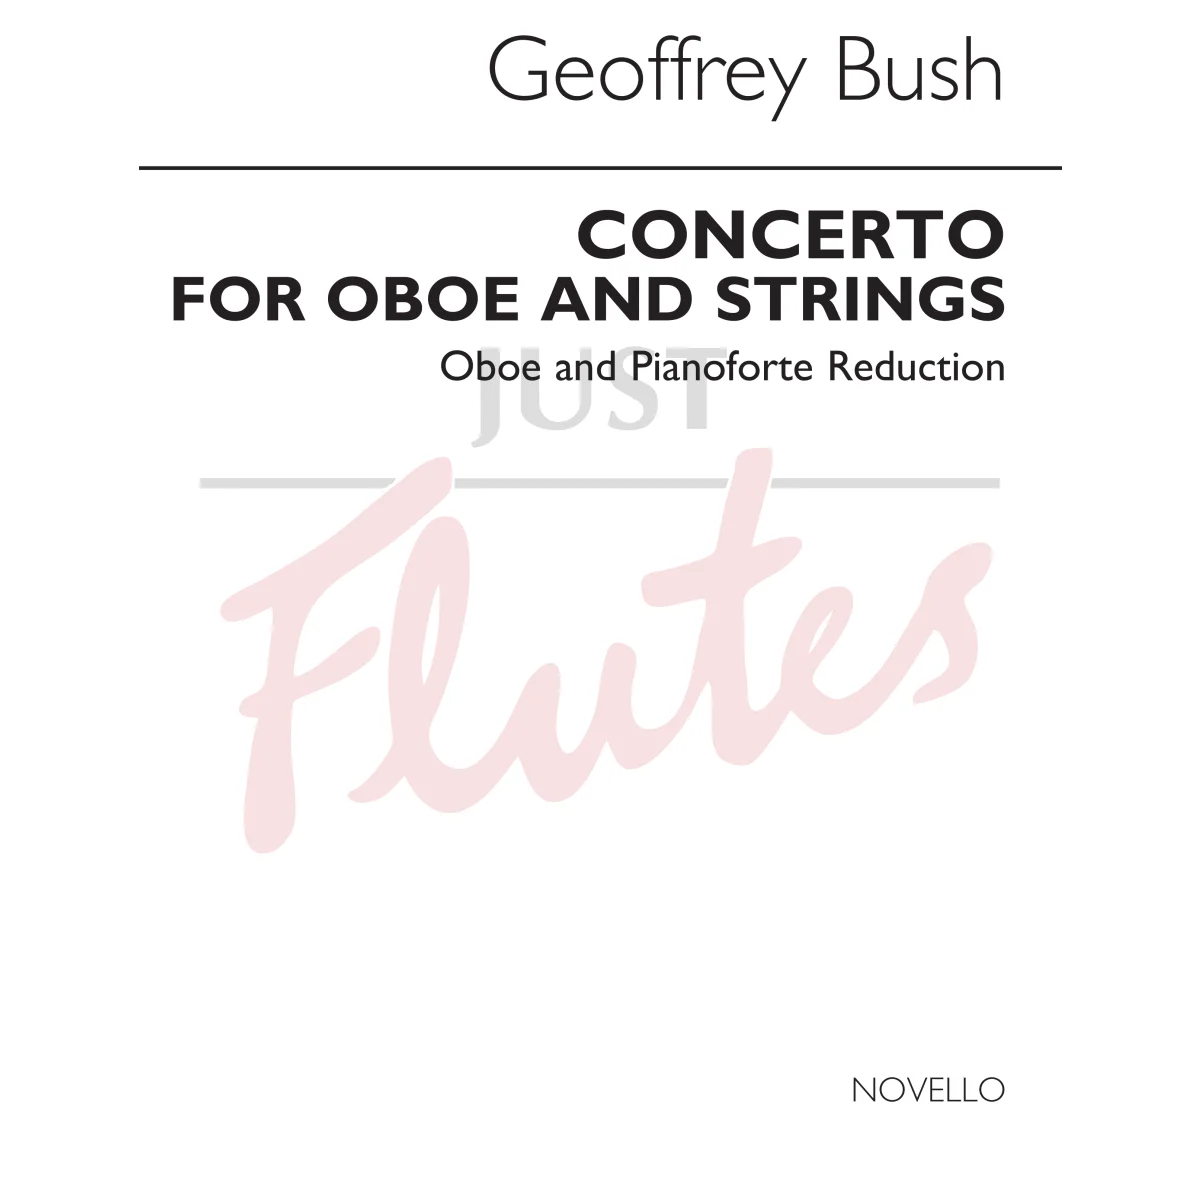 Concerto for Oboe and Piano